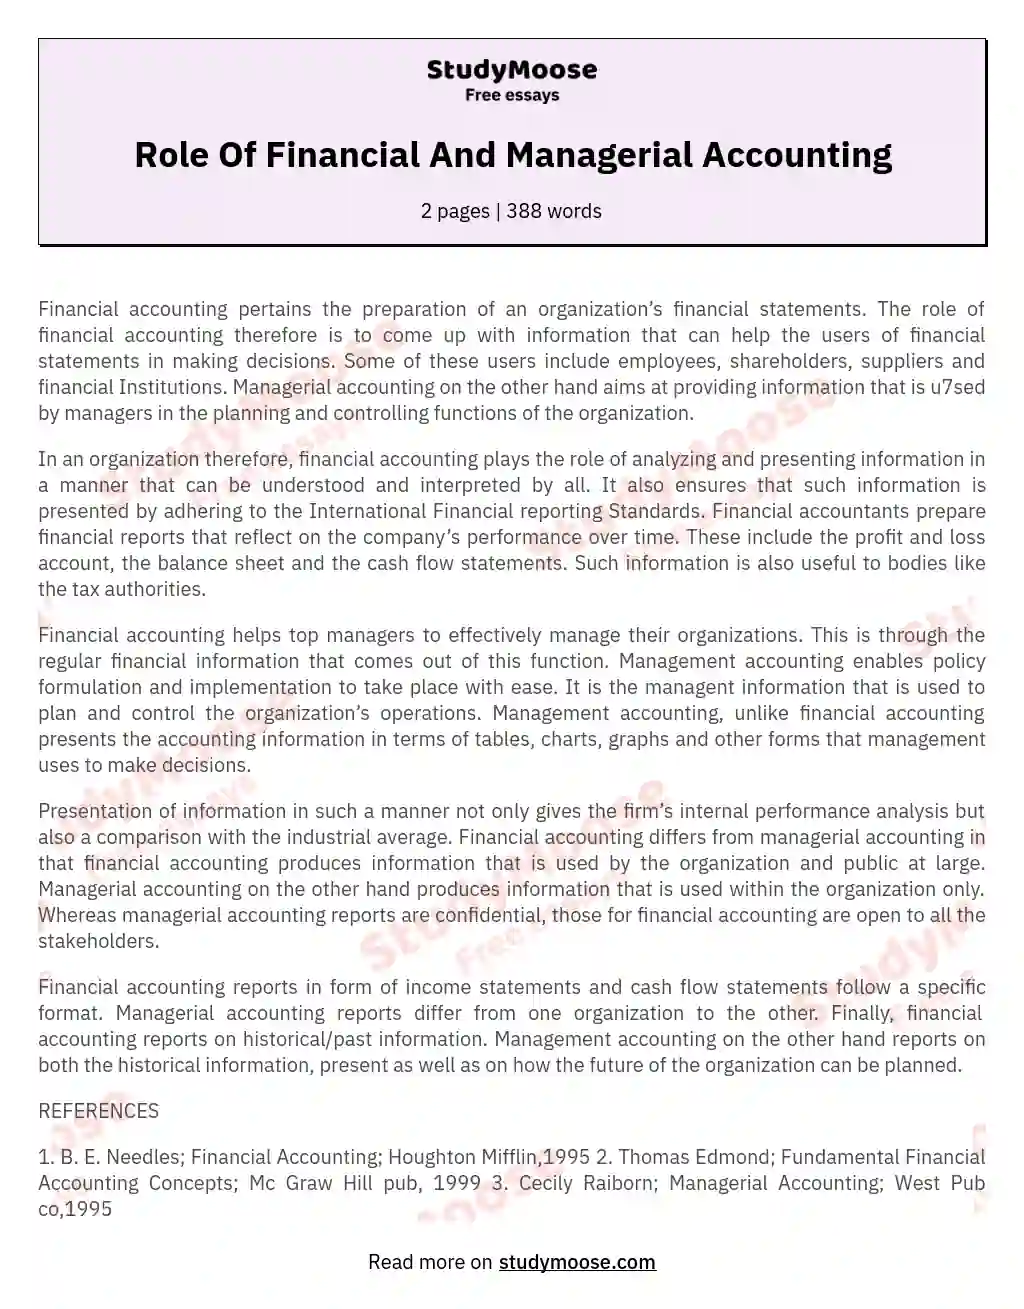 Role Of Financial And Managerial Accounting